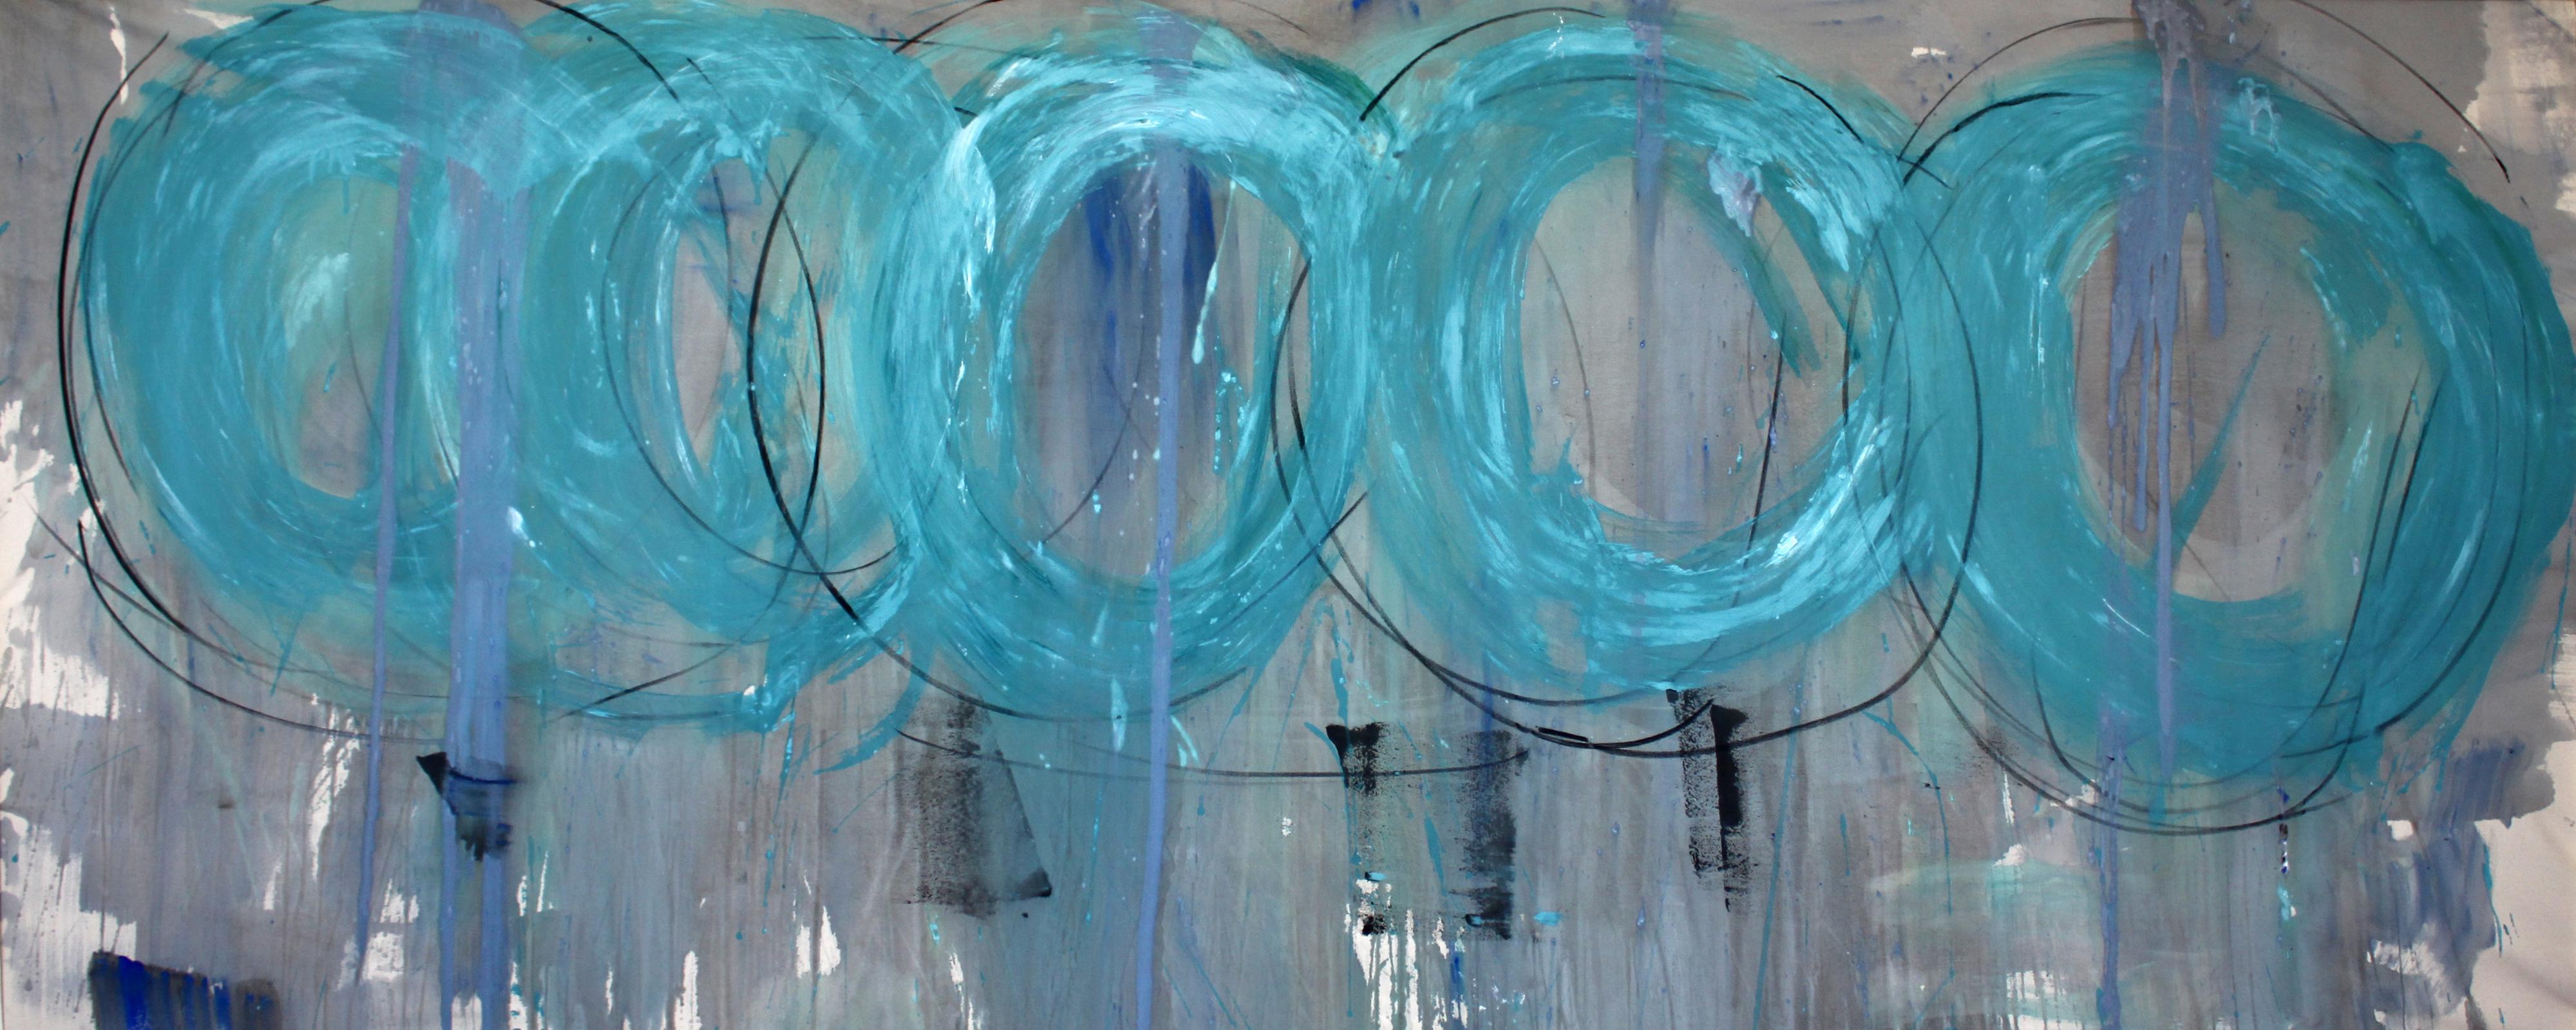 Francine Tint Abstract Painting - Seven Sirens